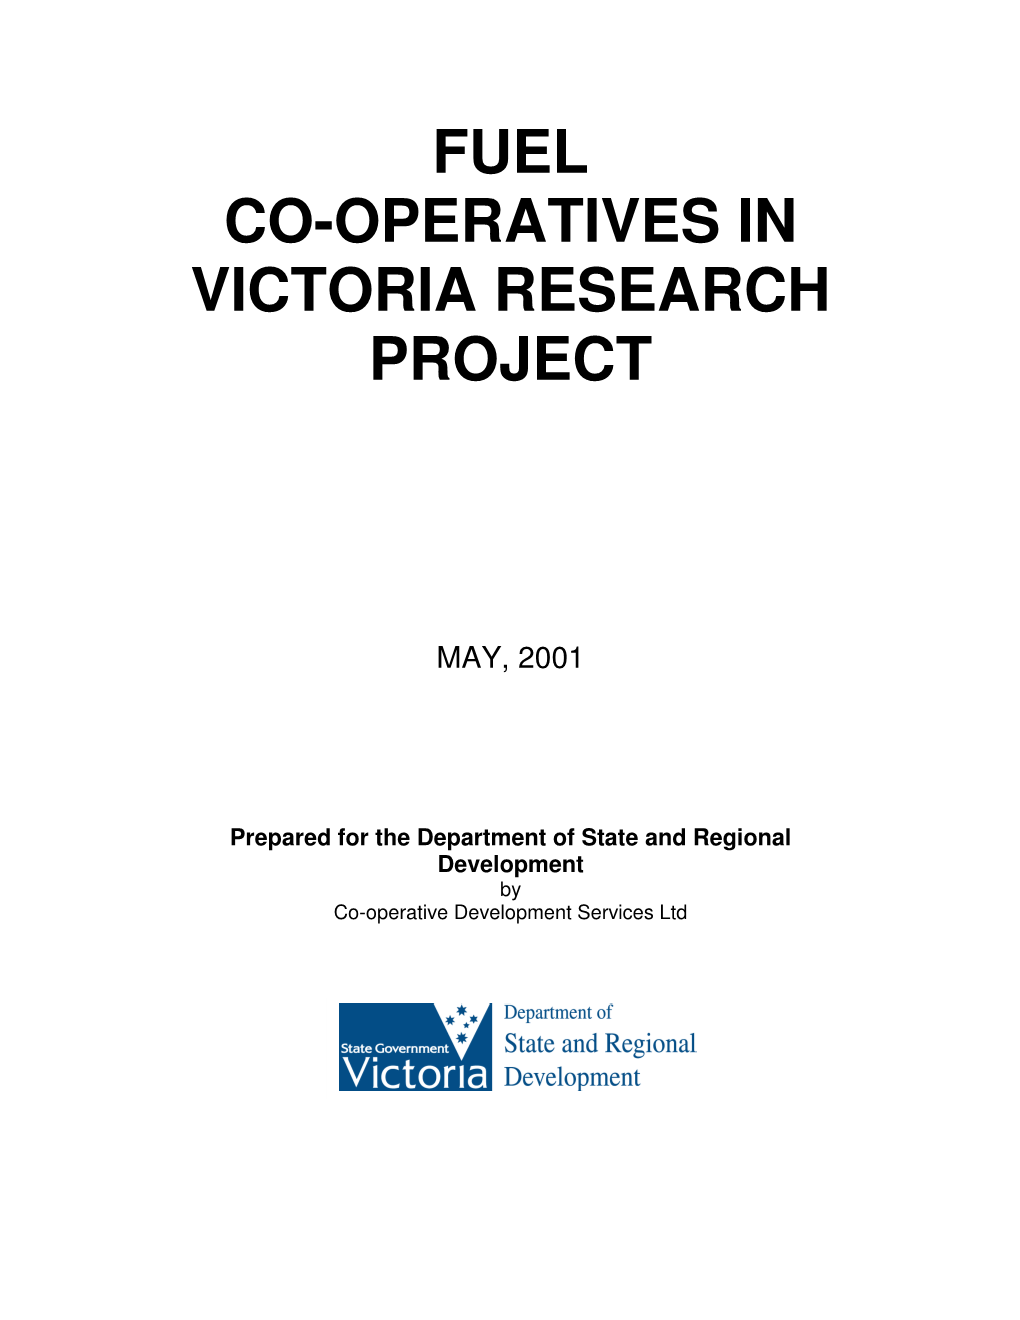 Fuel Co-Operatives in Victoria Research Project